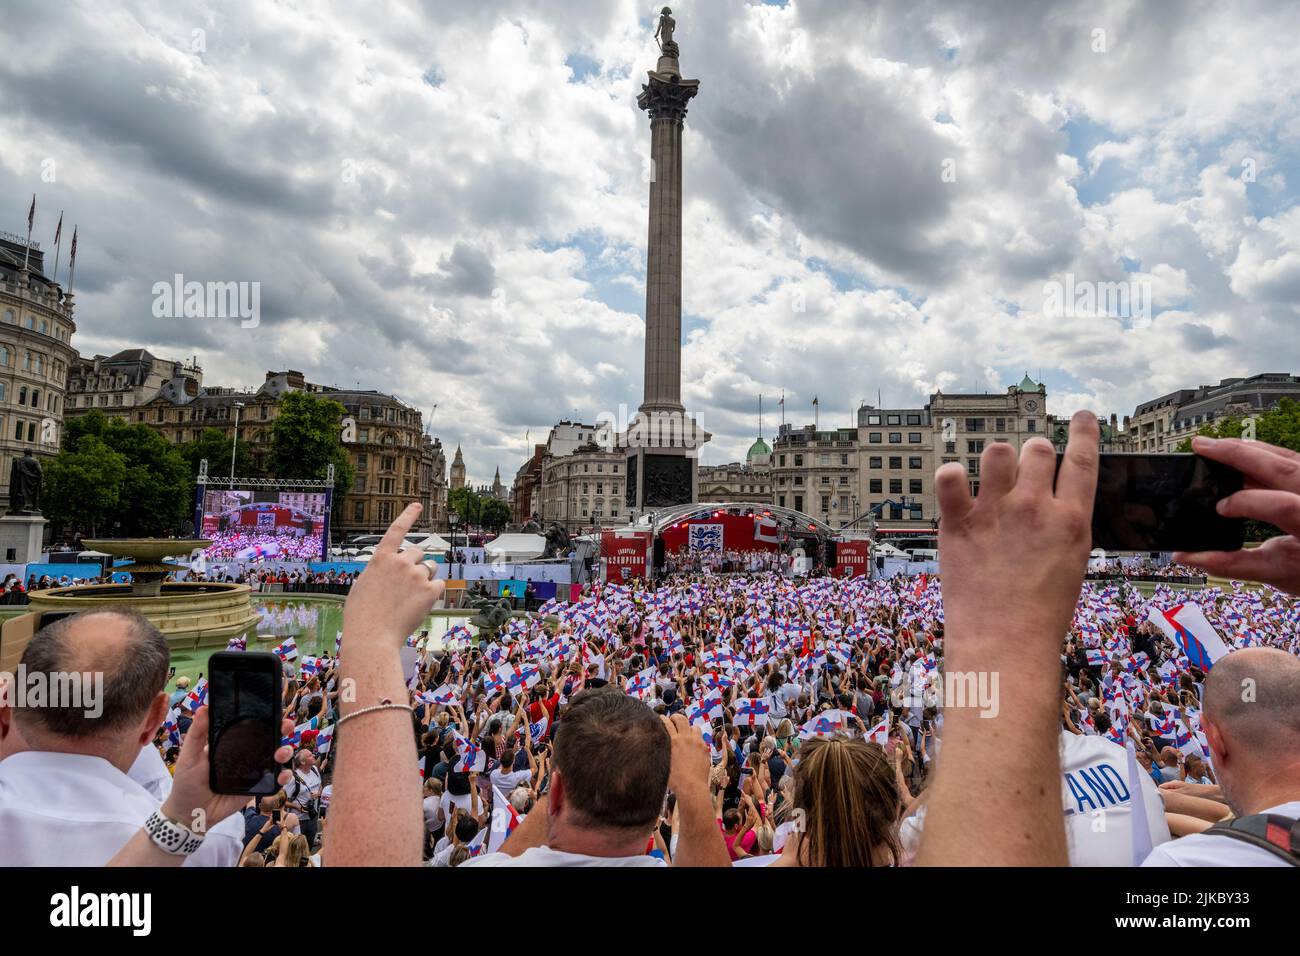 London, UK.  1 August 2022.  Members of the Women’s England football team and manager Sarina Wiegman, celebrate on stage watched by 7,000 fans in Trafalgar Square after winning the European Championship final (Euro 2022) against Germany at Wembley Stadium the day before.  Credit: Stephen Chung / Alamy Live News Stock Photo